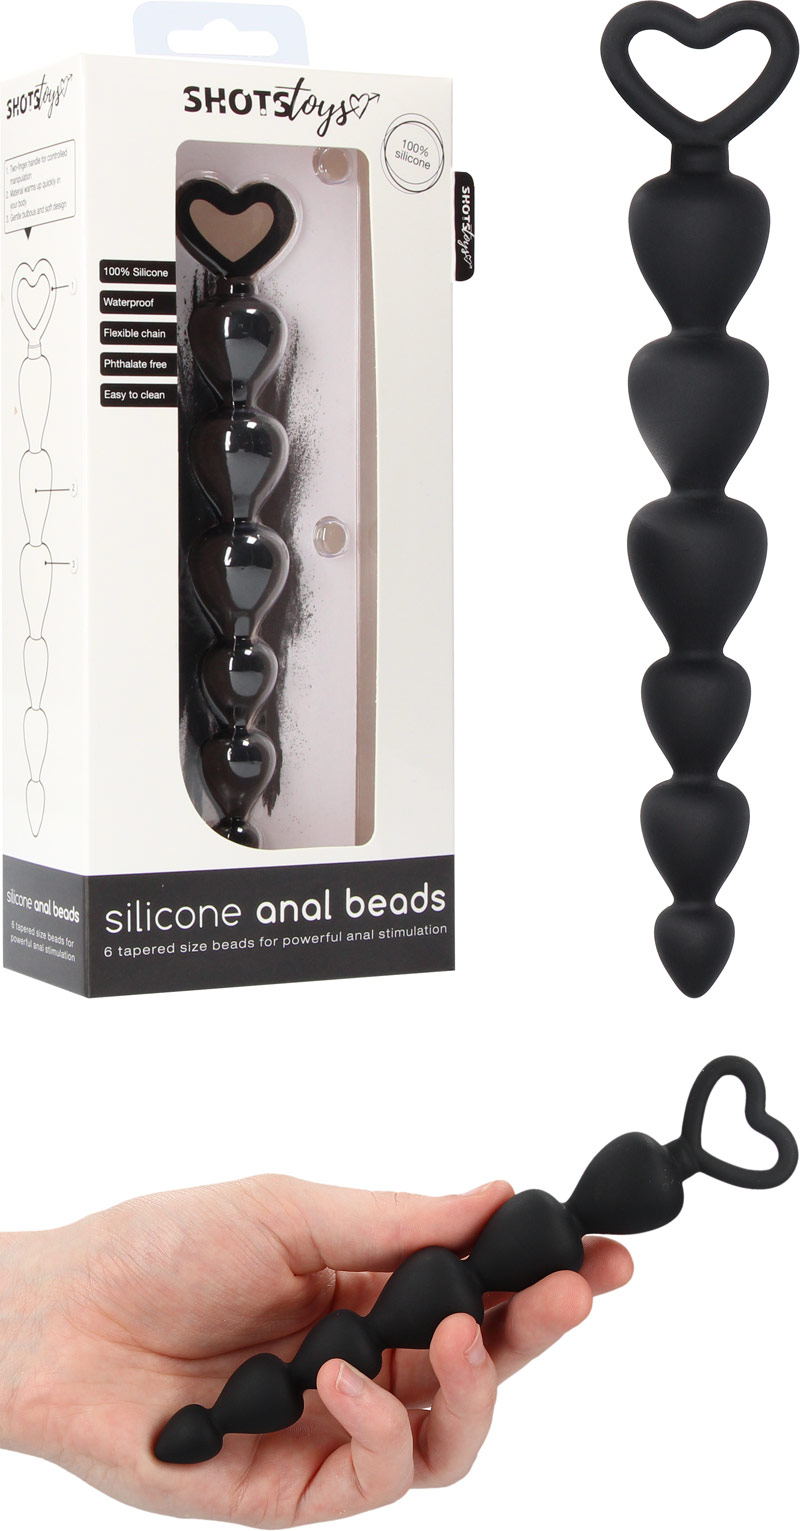 Catena anale in silicone ShotsToys Silicone Anal Beads